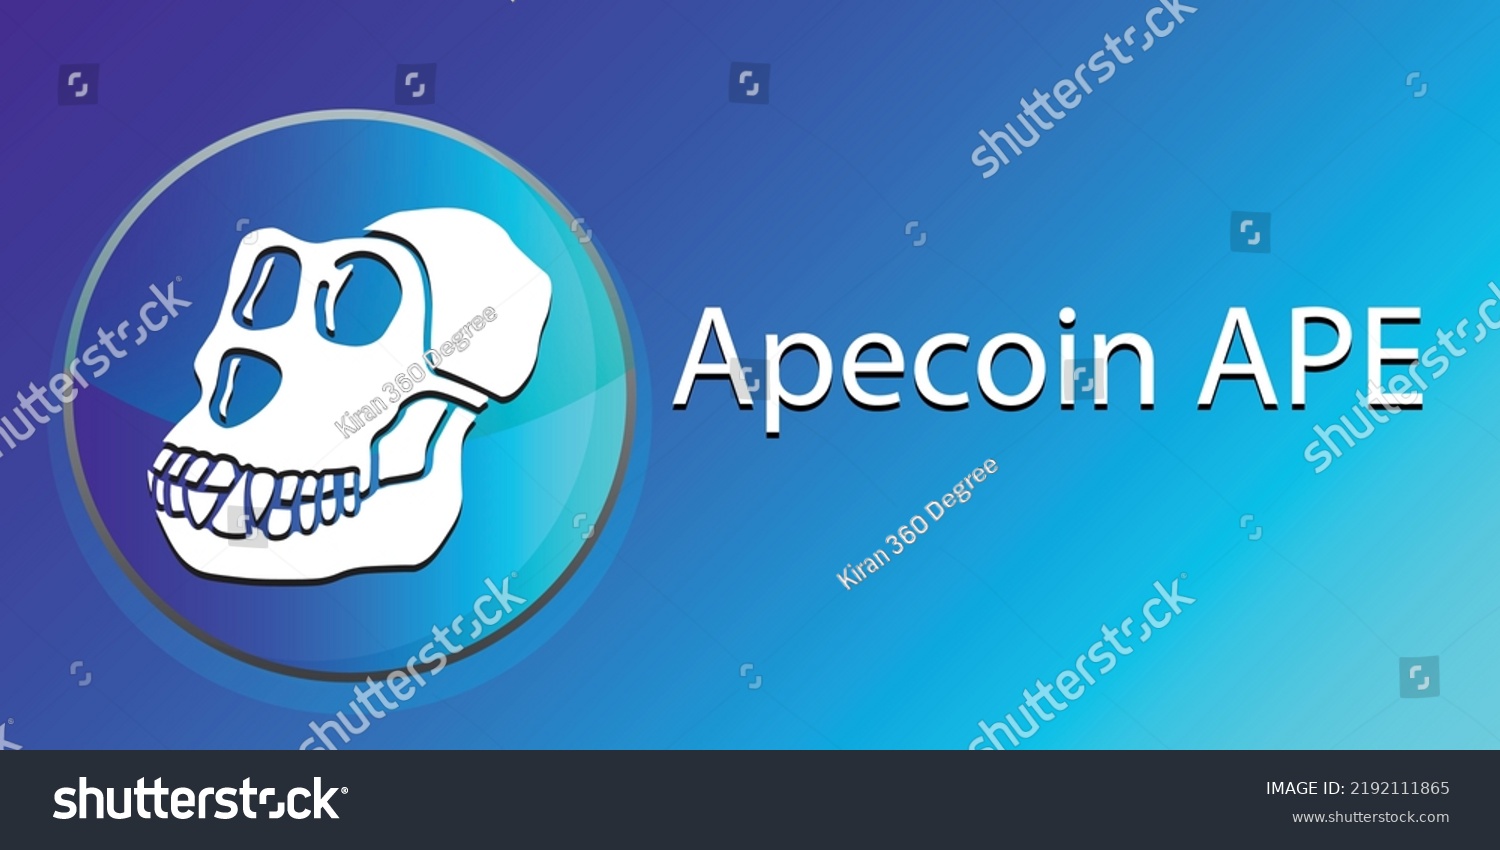 SVG of Apecoin APE Crypto currency vector illustration blockchain white logo isolated on blue coin on blue background, cryptocurrency token for poster, web, sticker. futuristic decentralized finance concept. svg